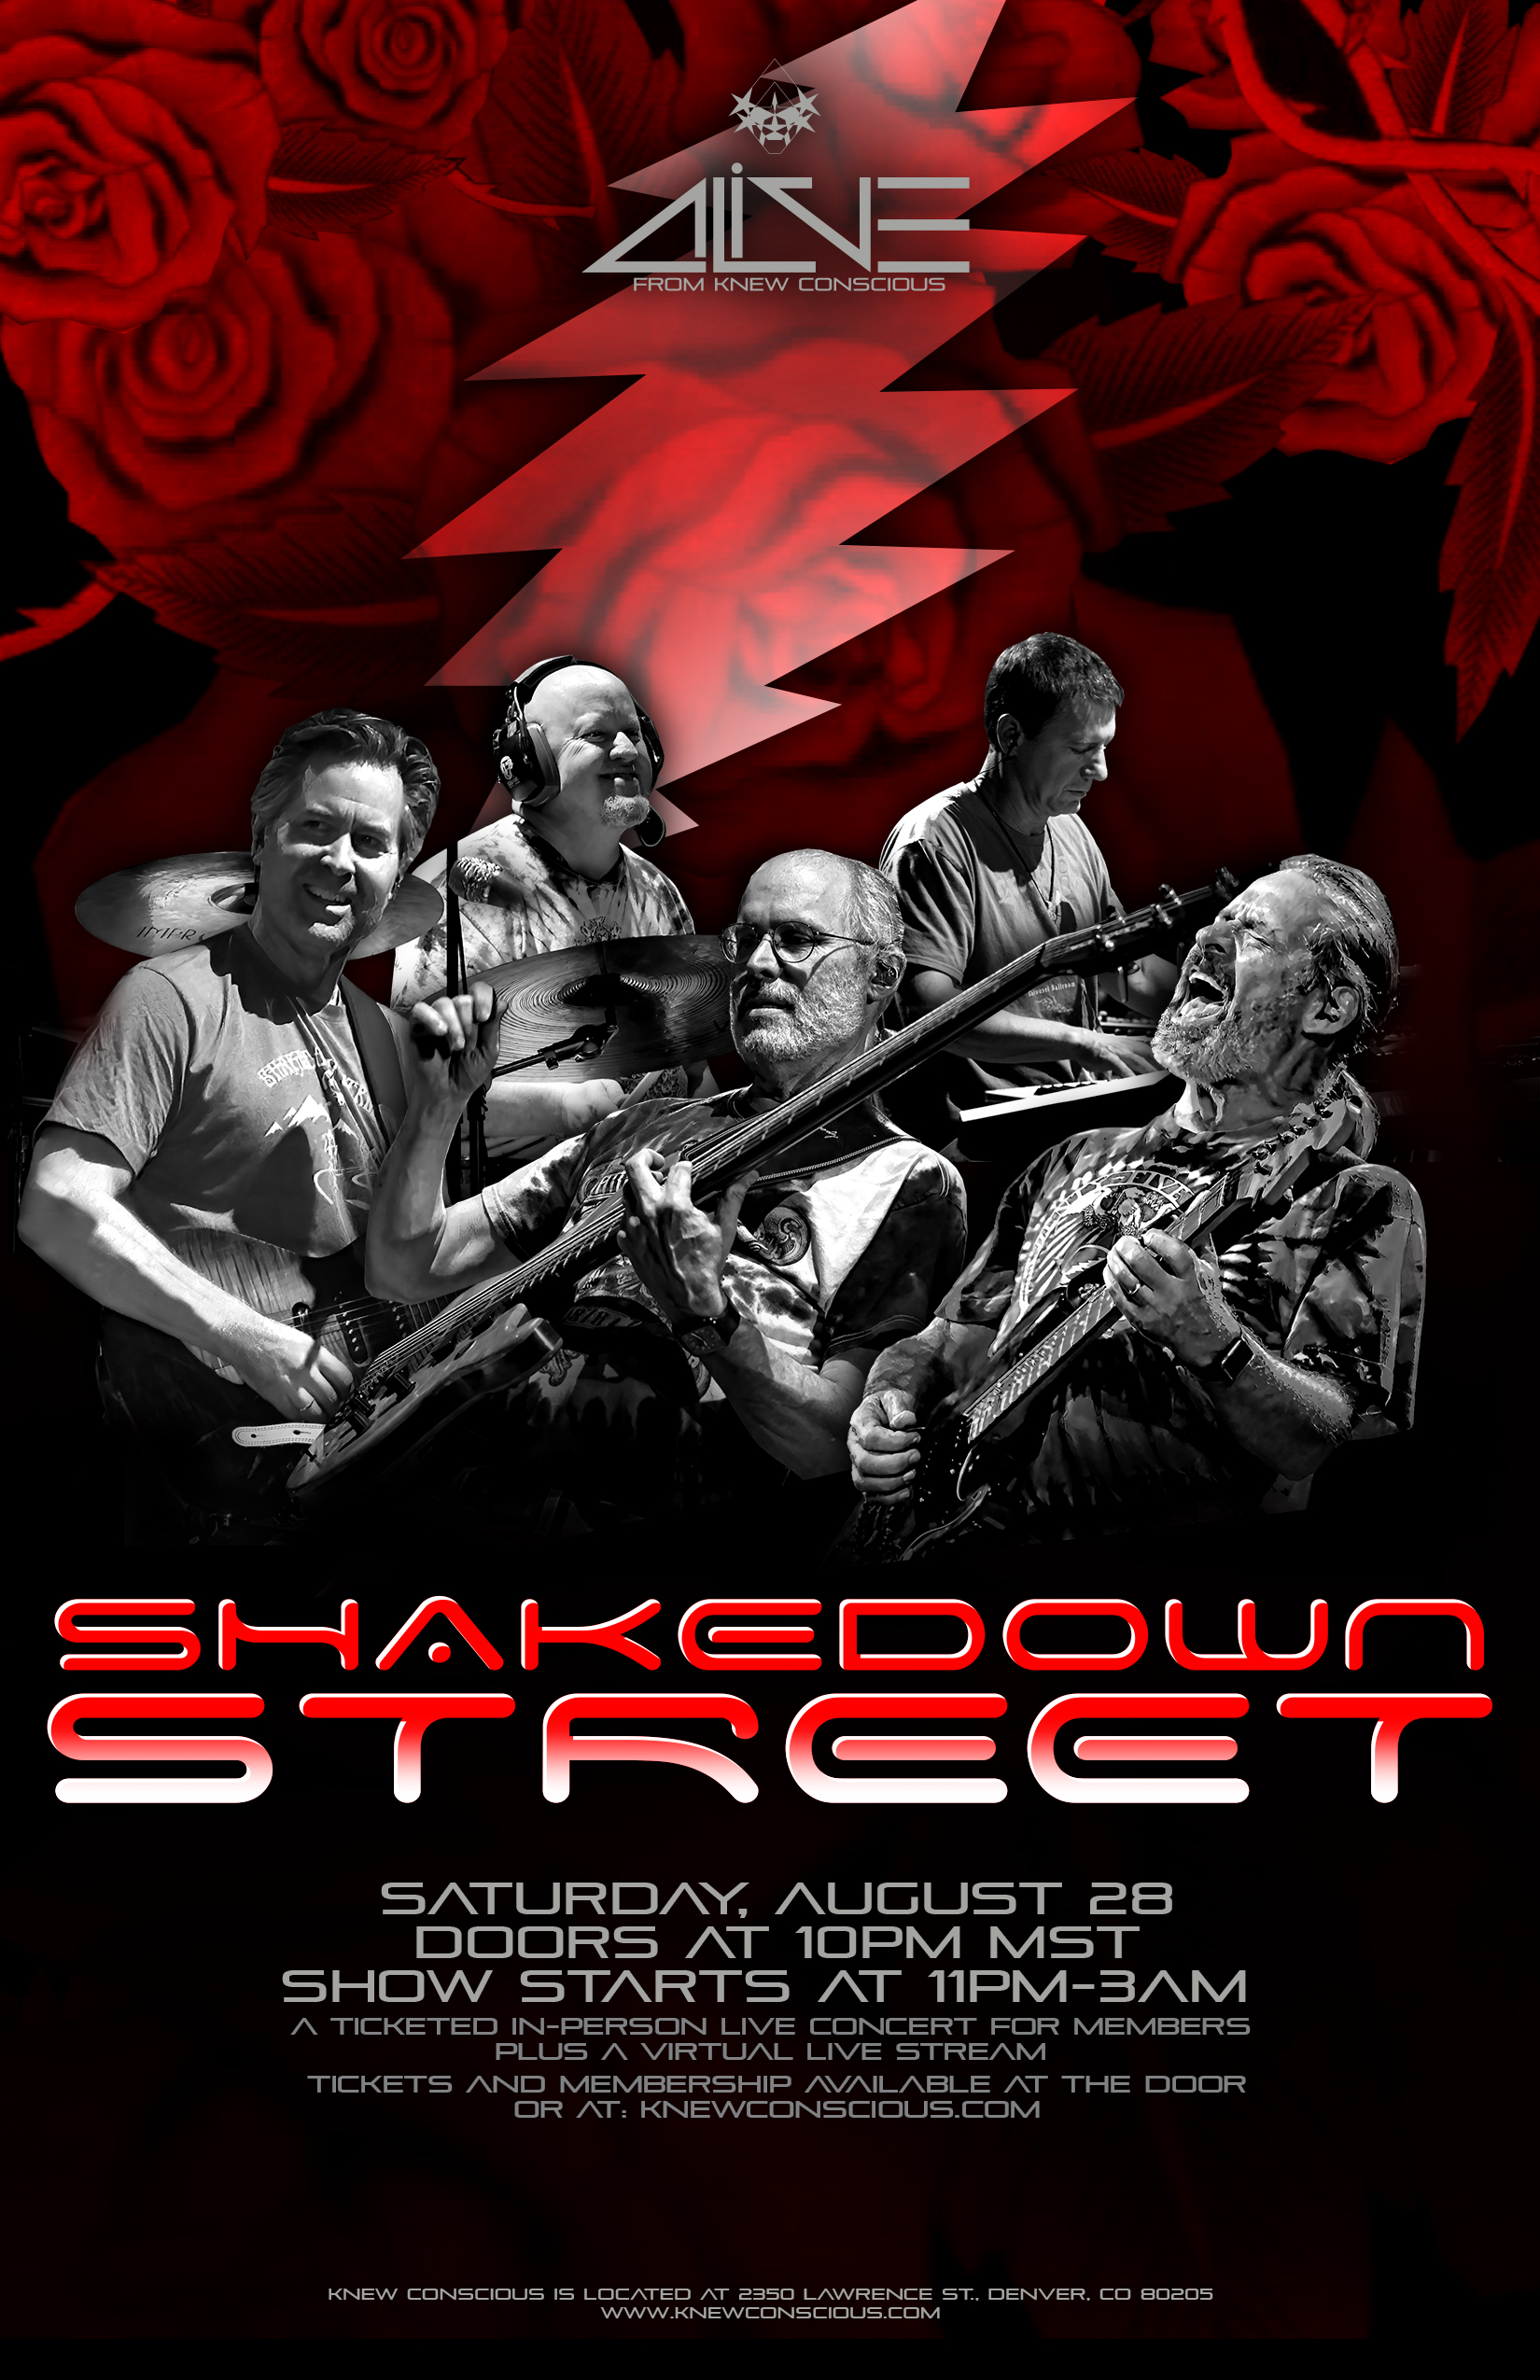 SHAKEDOWN STREET TO PERFORM AT KNEW CONSCIOUS ON AUGUST 28TH